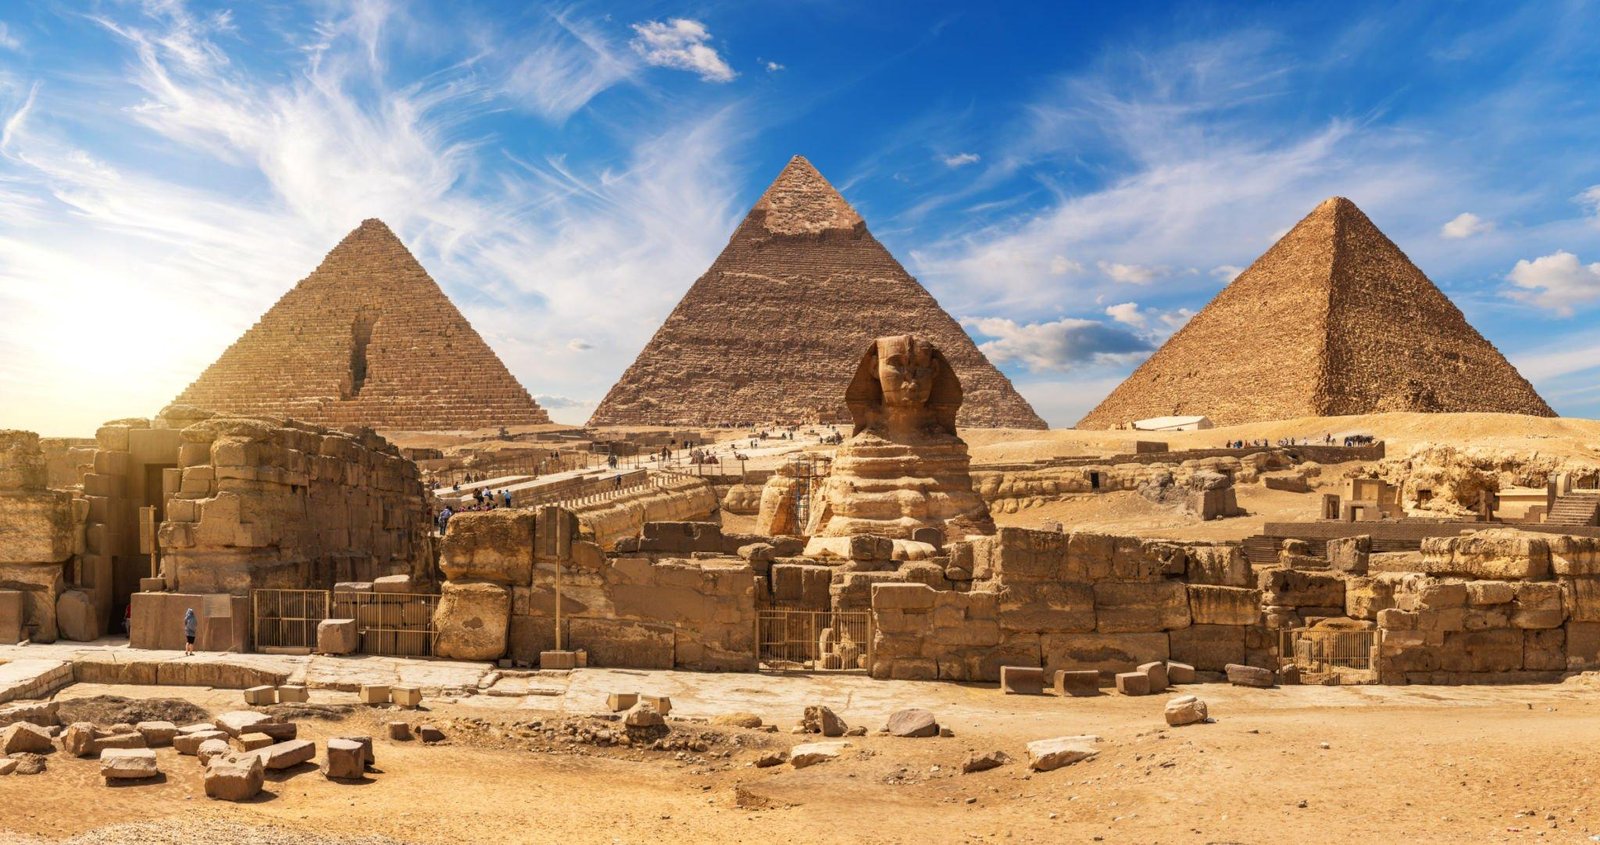 Cairo Over-day Visit Egyptian Museum, Pyramids, Sphinx & Lunch – Sharm El Sheikh